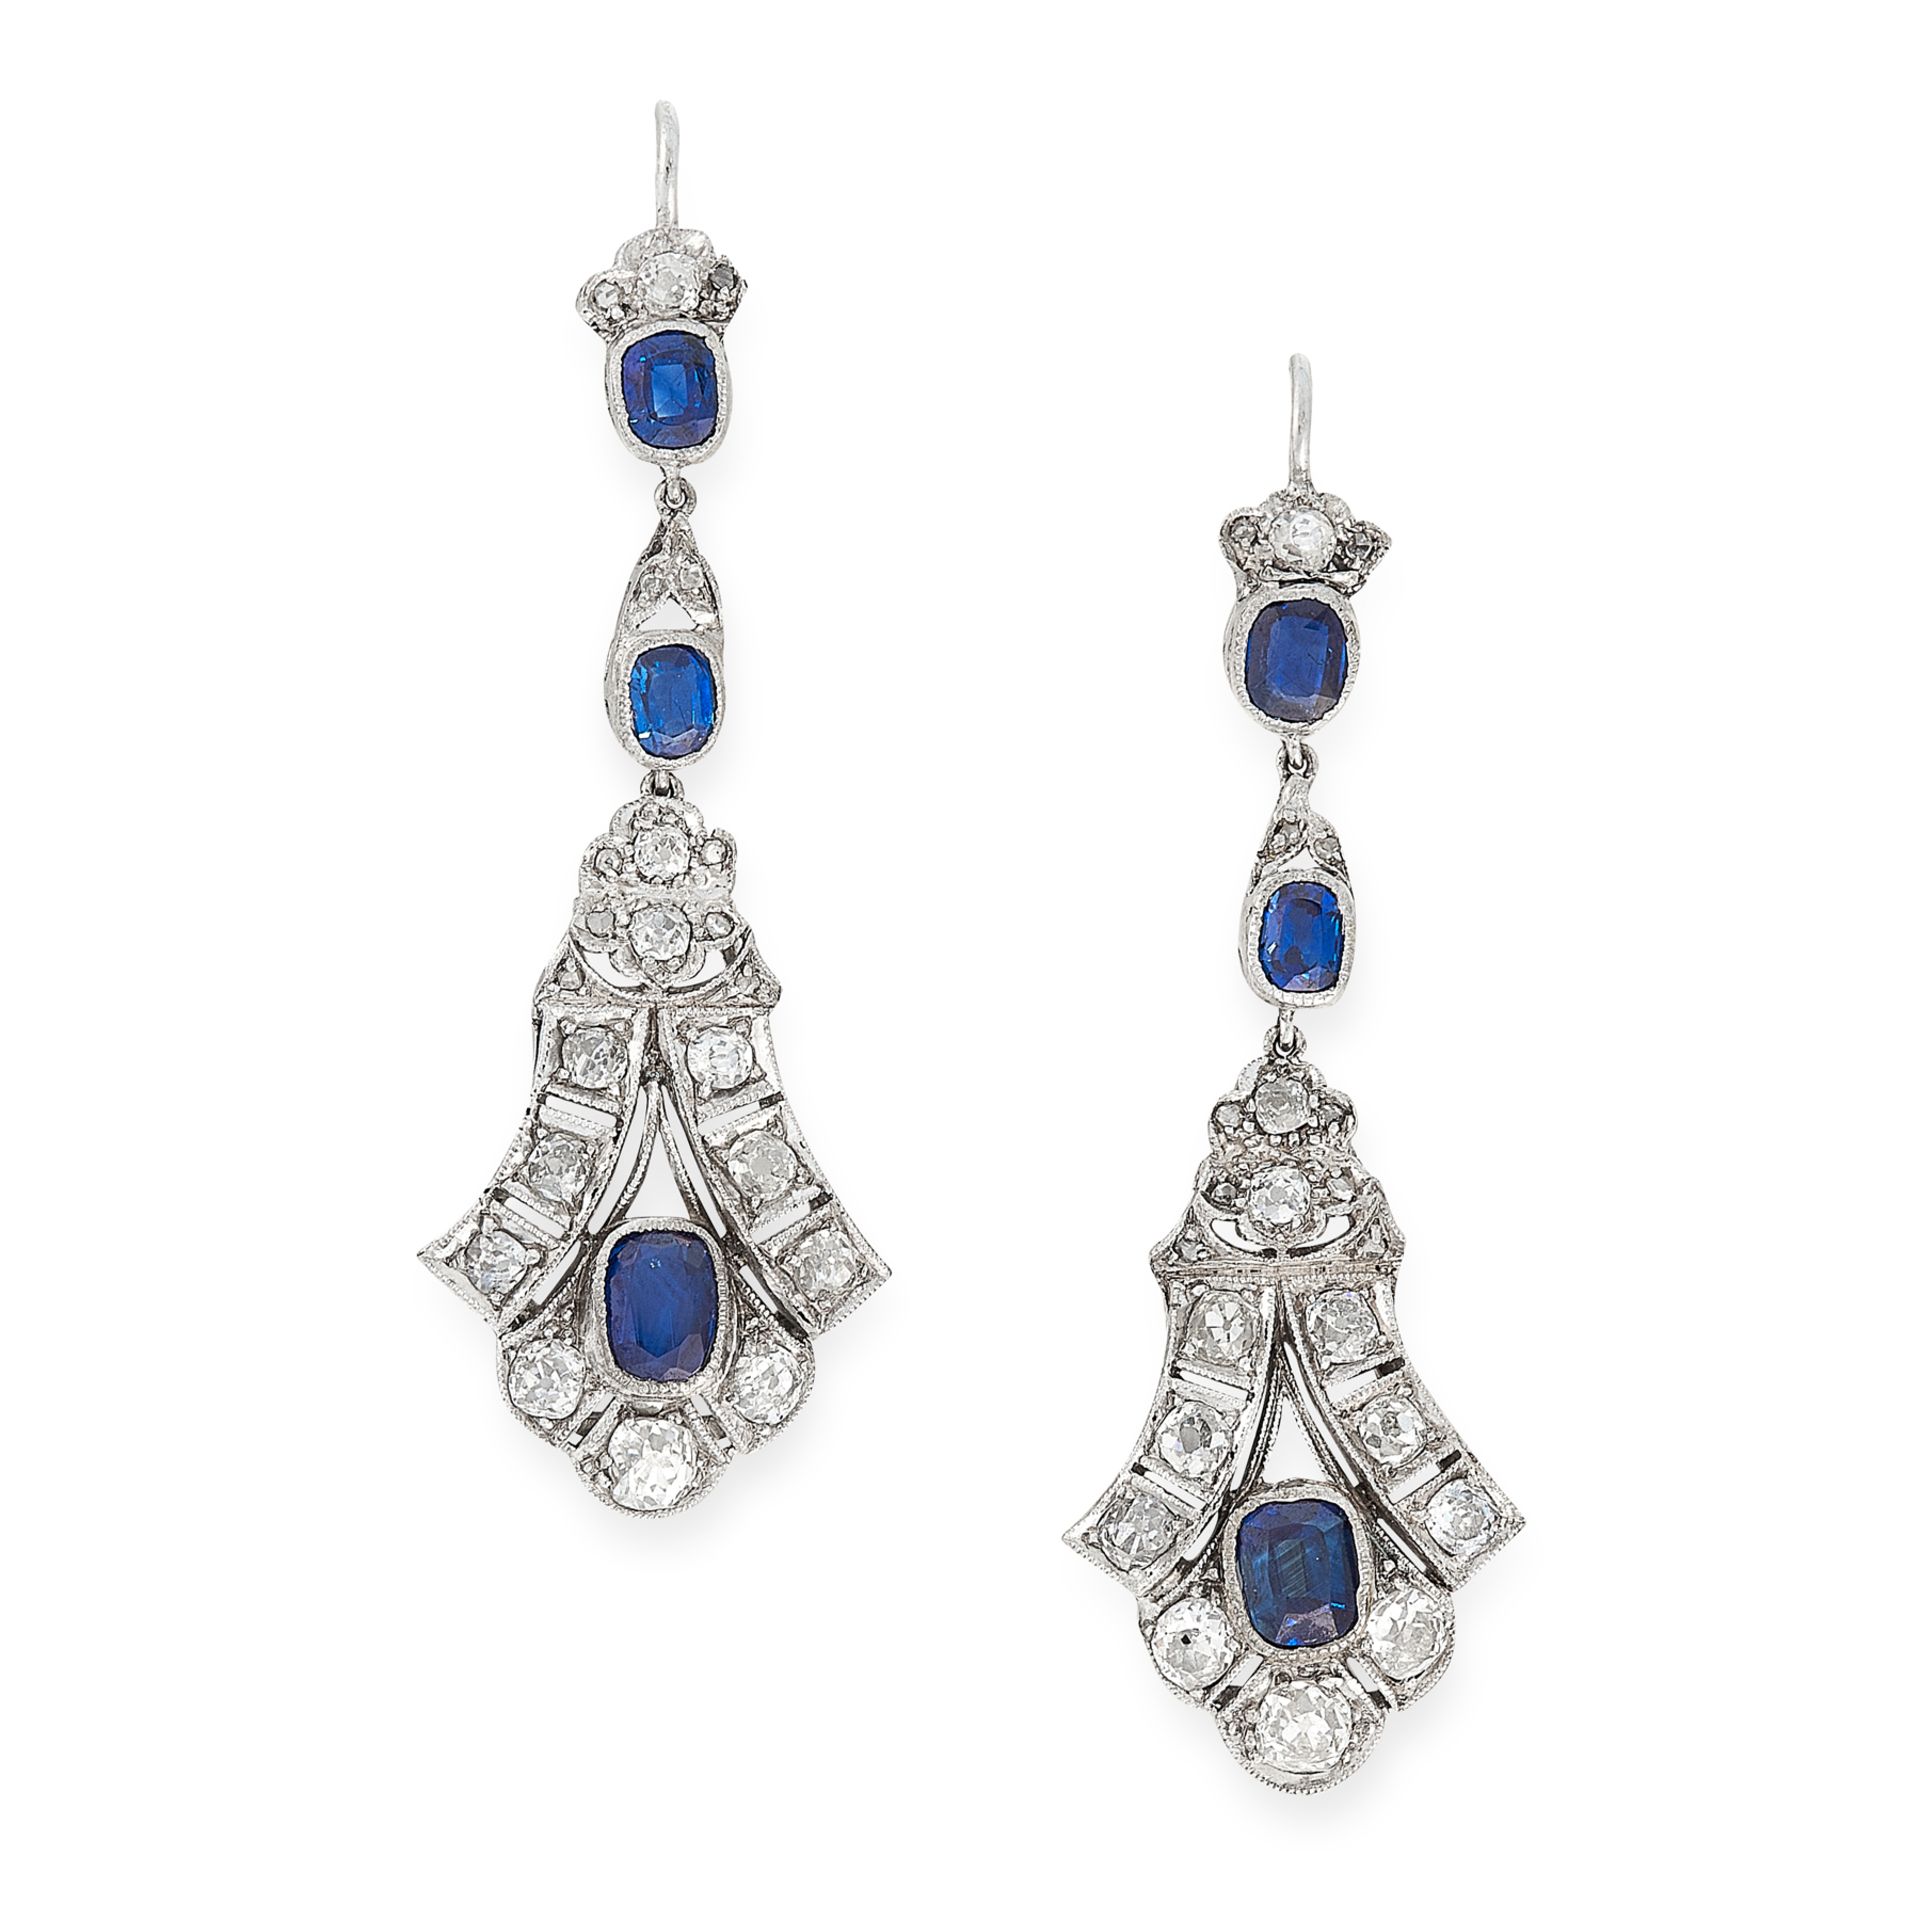 A PAIR OF SAPPHIRE AND DIAMOND EARRINGS, EARLY 20TH CENTURY in platinum and 18ct white gold, of